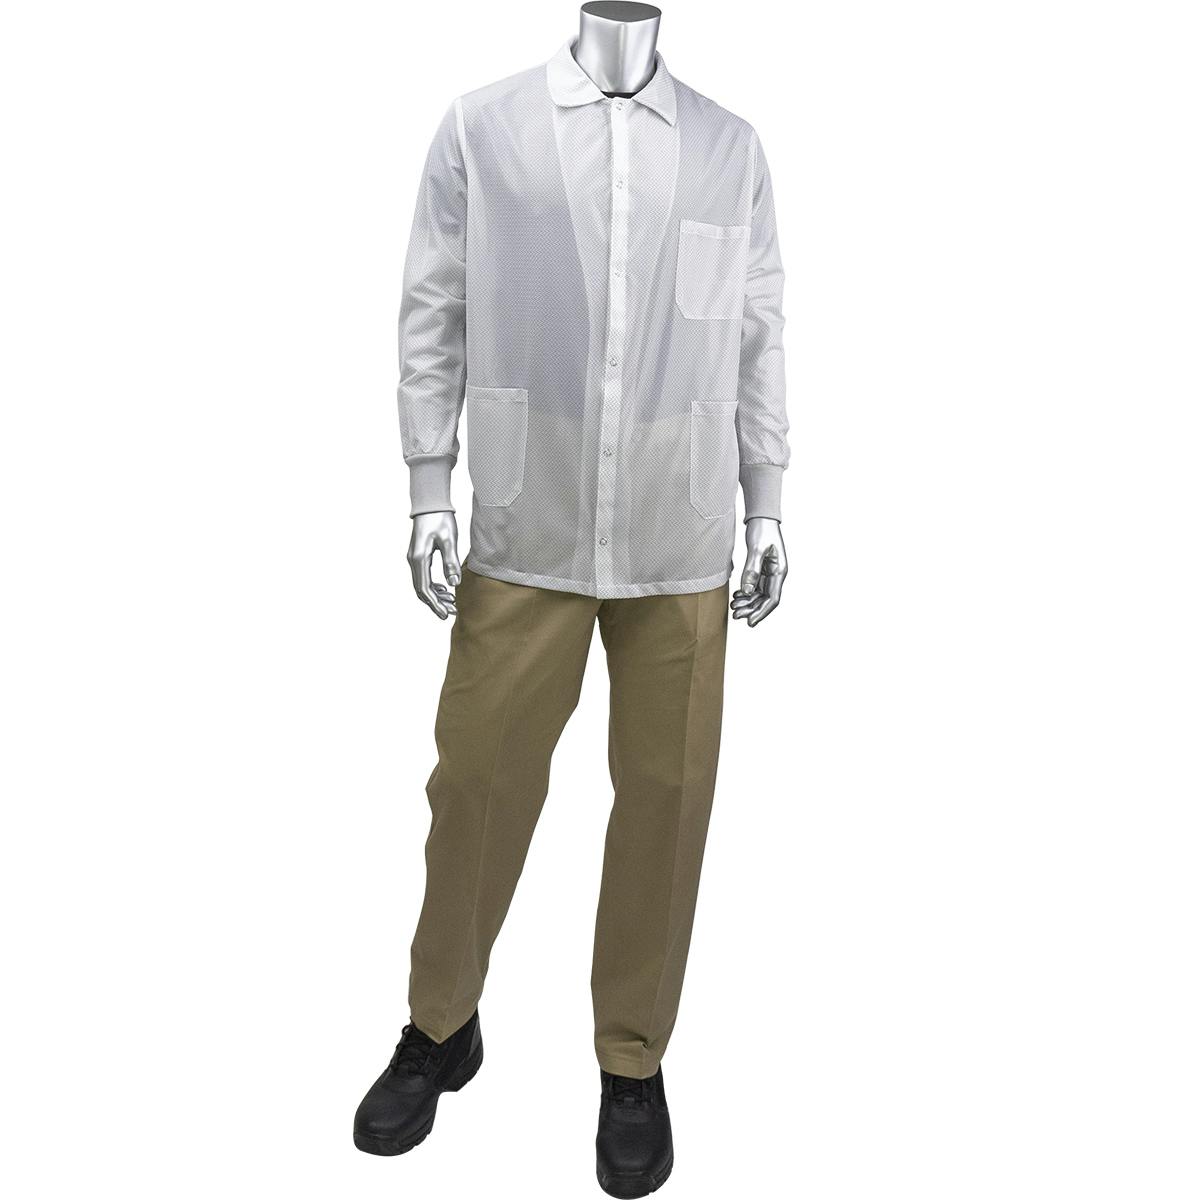 StatStar Short ESD Labcoat - ESD Knit Cuff, White (BR49AC-44WH)_0